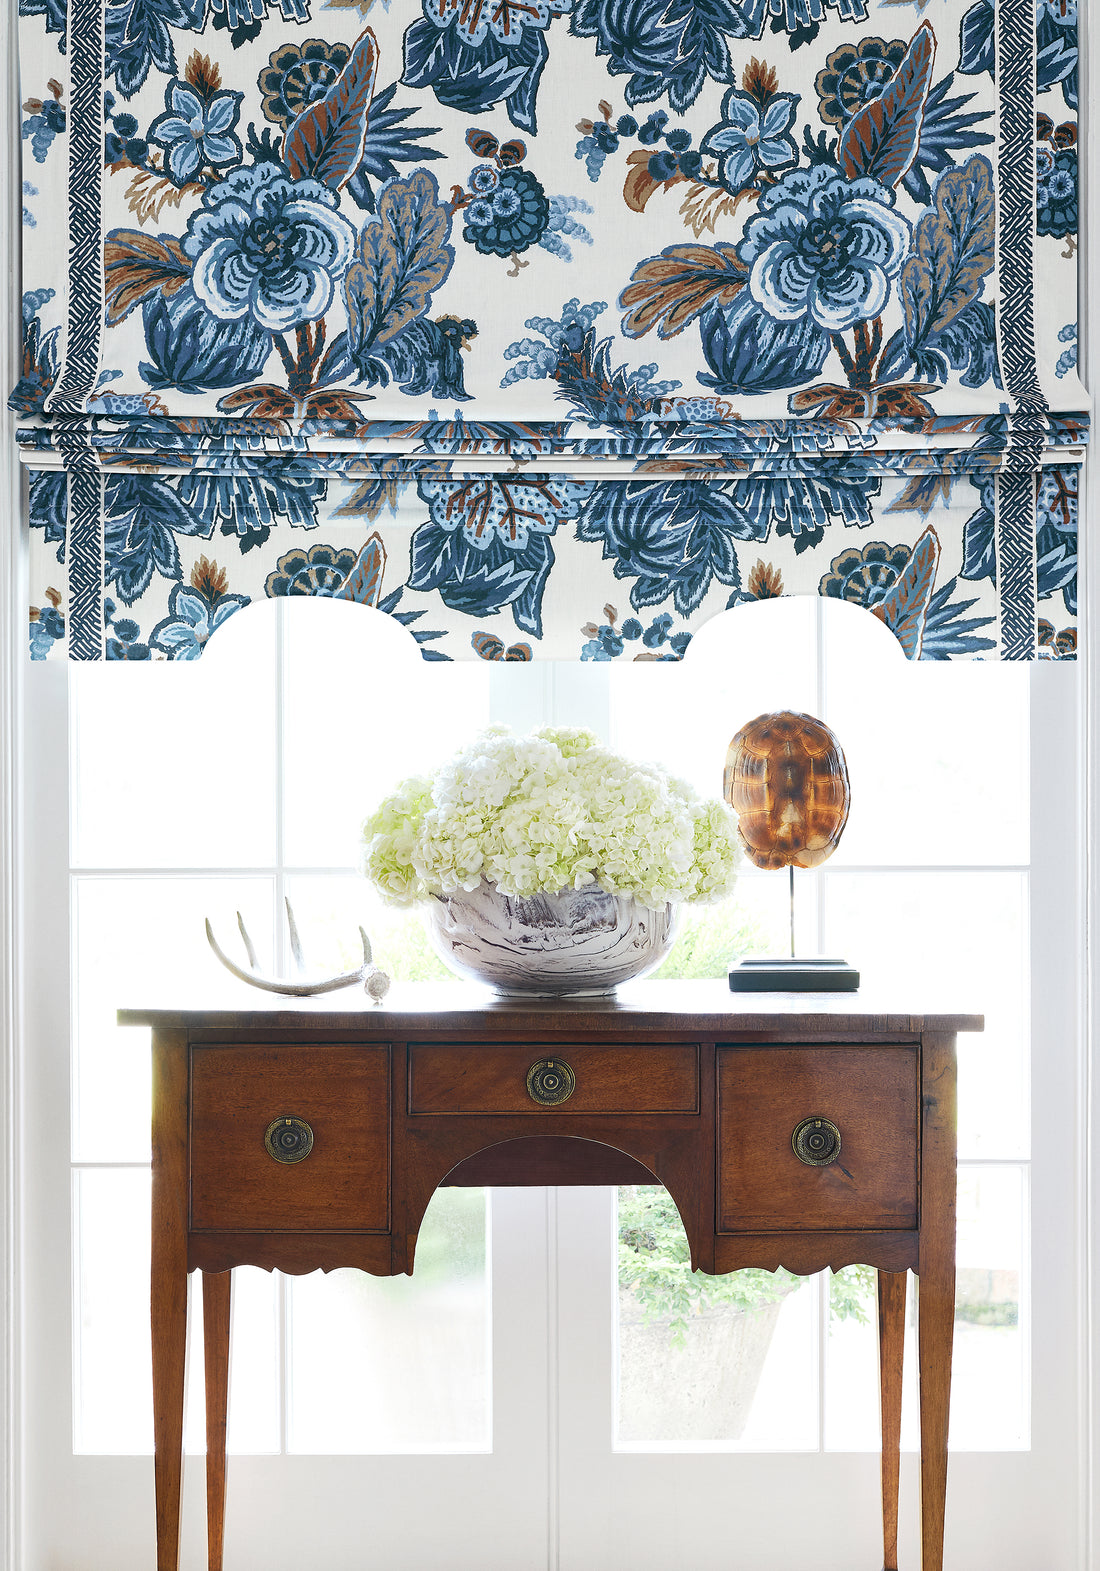 Roman shade in Floral Gala printed fabric in navy and white color - pattern number F910213 by Thibaut in the Colony collection